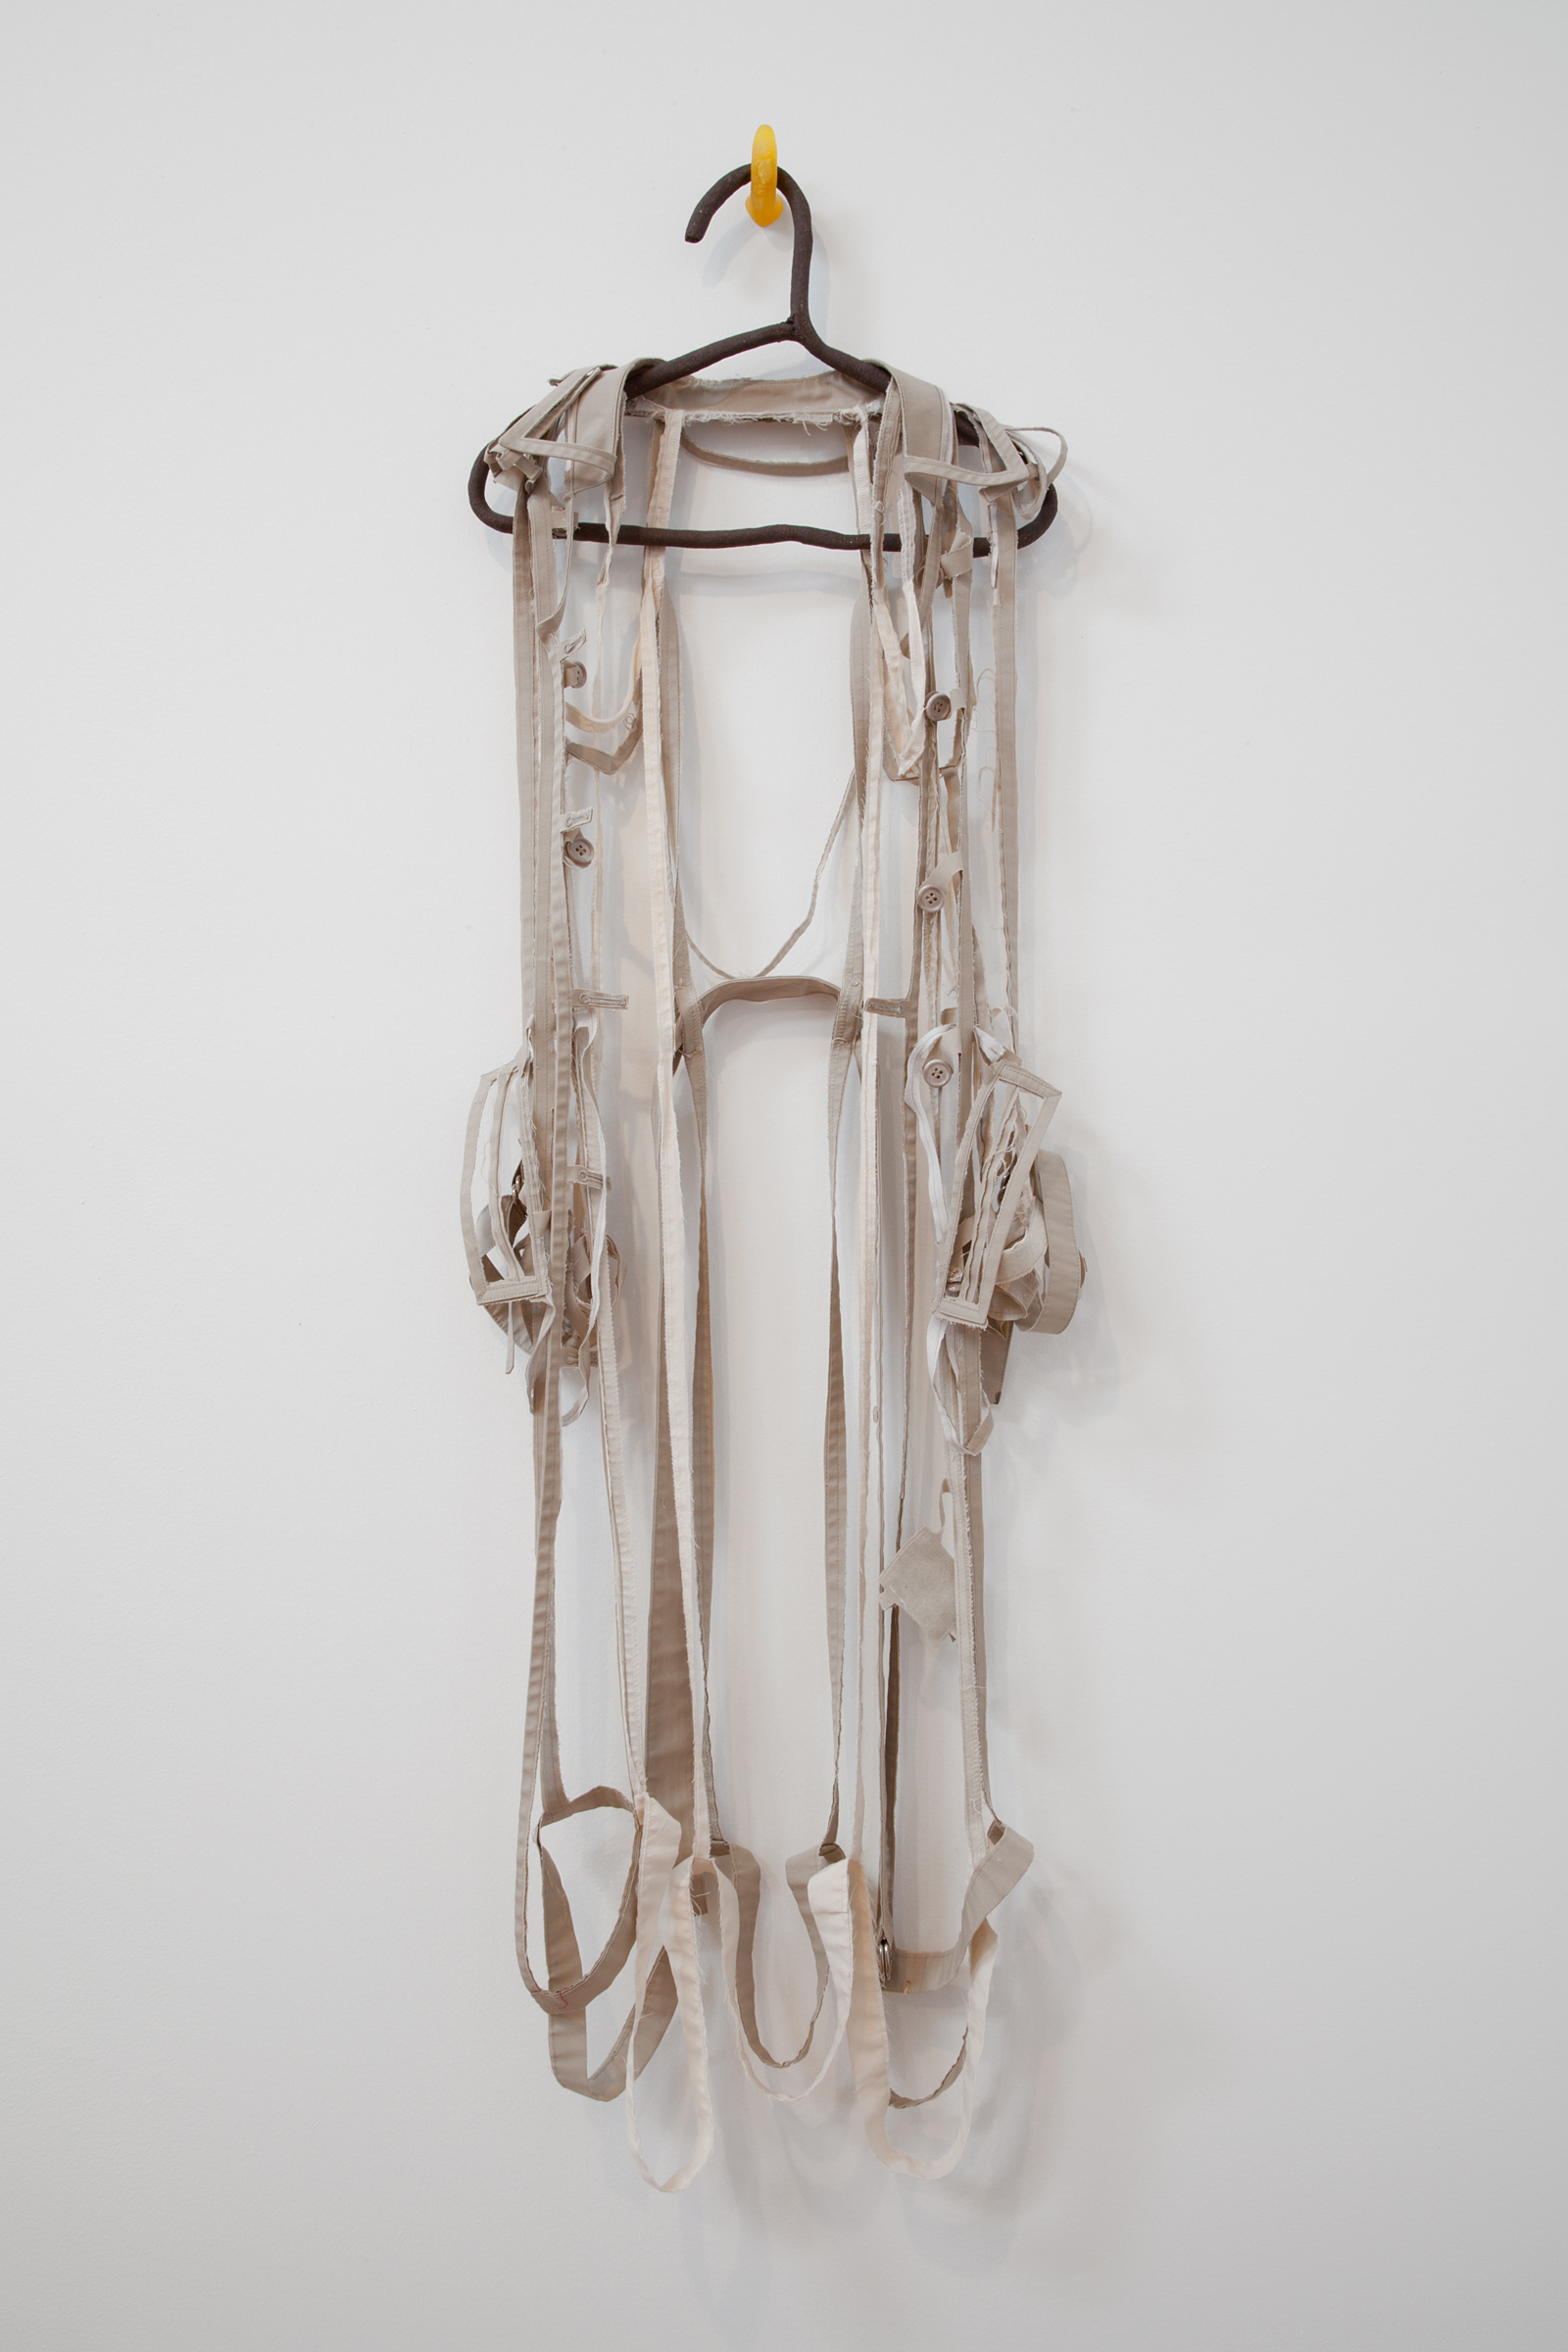   ANNA SEW HOY   beige/cream , fired stoneware, trench coat and resin finger hook, 55" x 17" x 3.5", 2012 